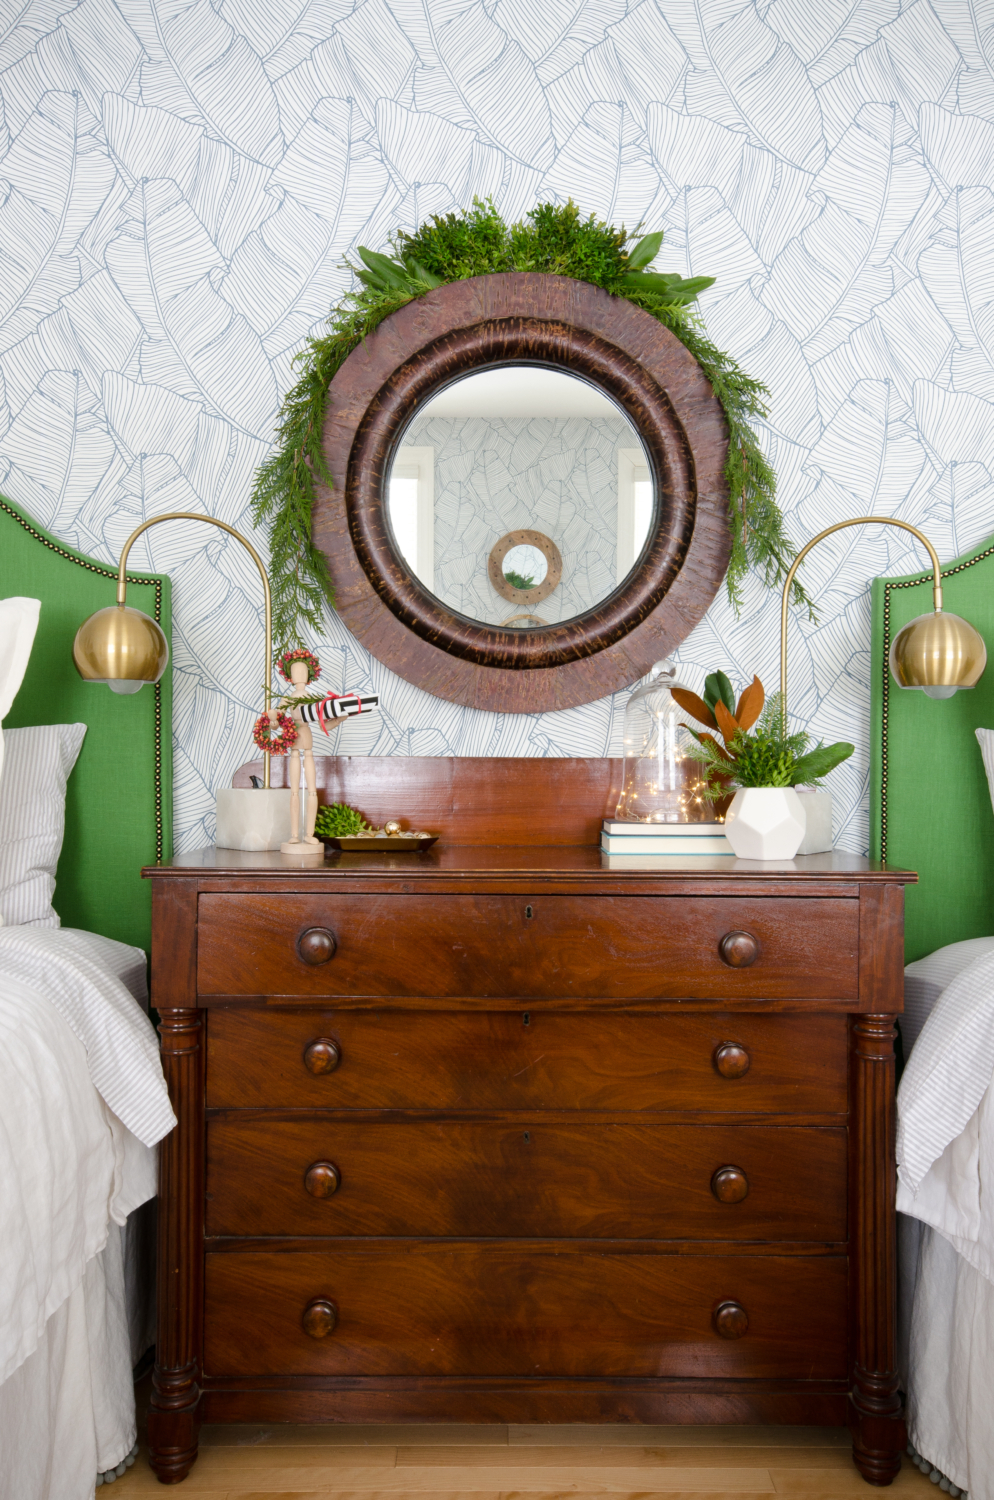 Classic Christmas guest room with custom DIY upholstered headboards, red plaid pillows, fresh greenery, and cute, quirky accents. Perfect way to make Christmas guest feel at home!